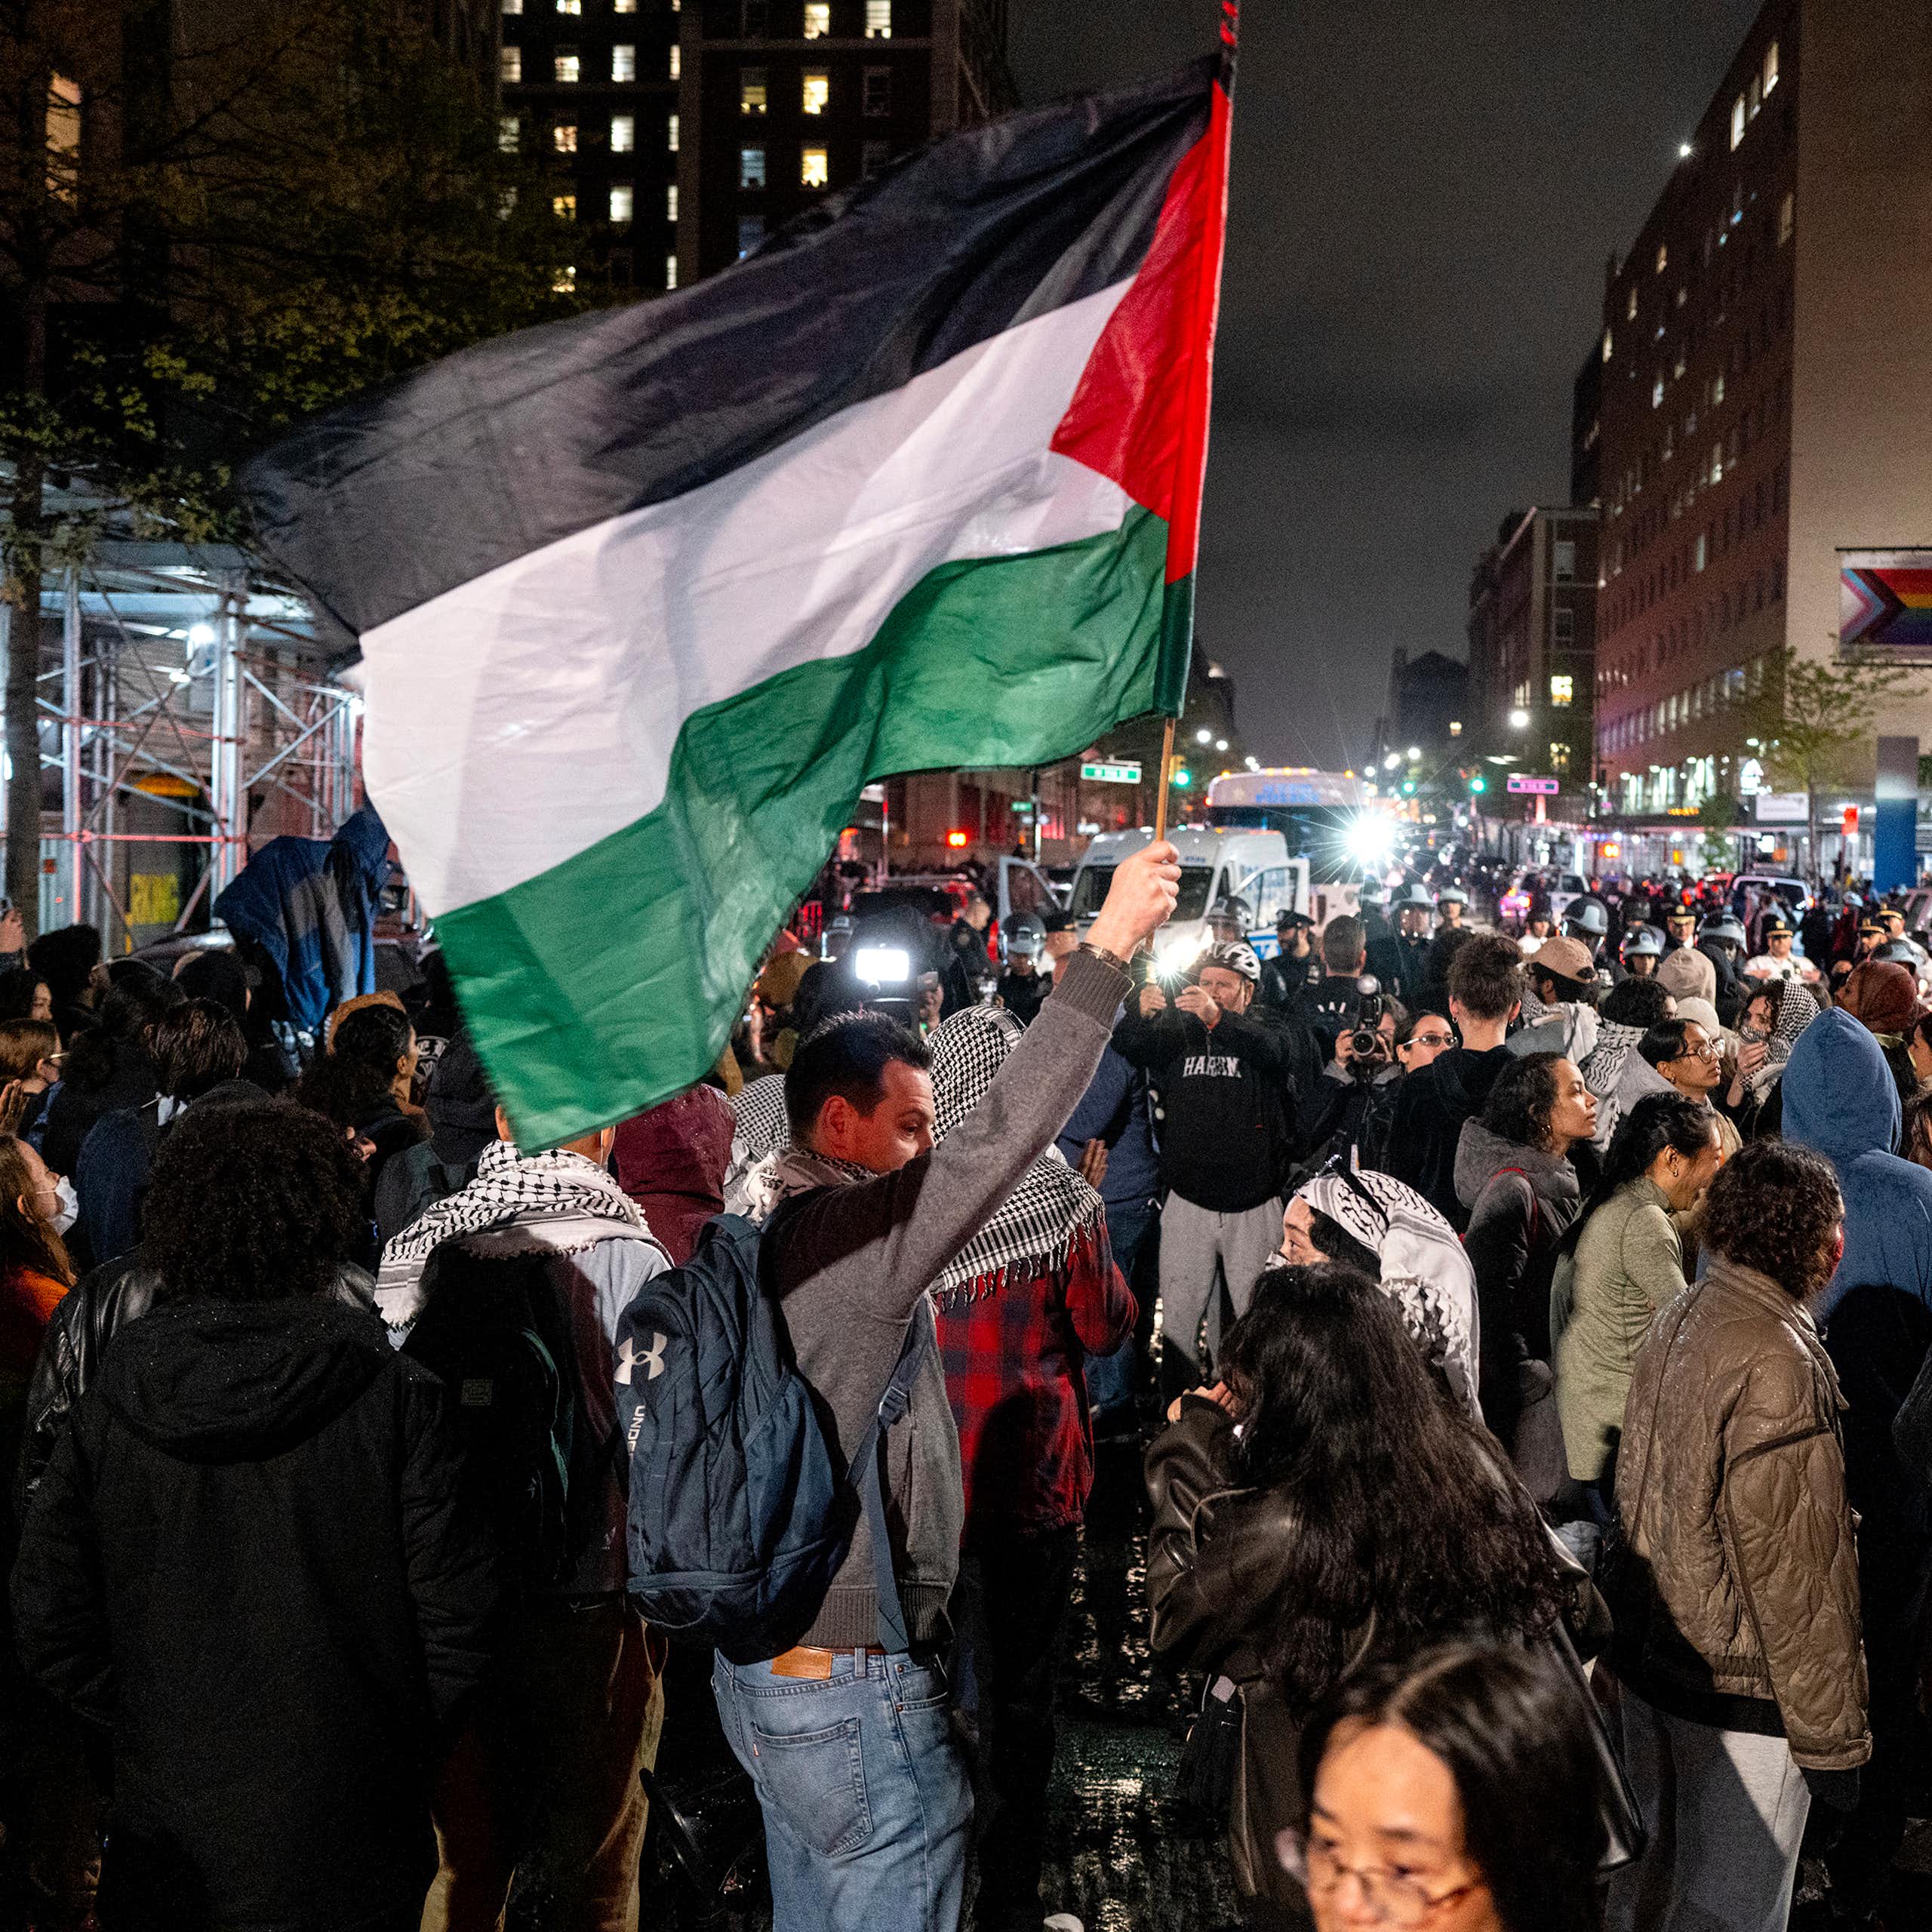 People gather in a city, with one of them holding a large Palestinian flag.